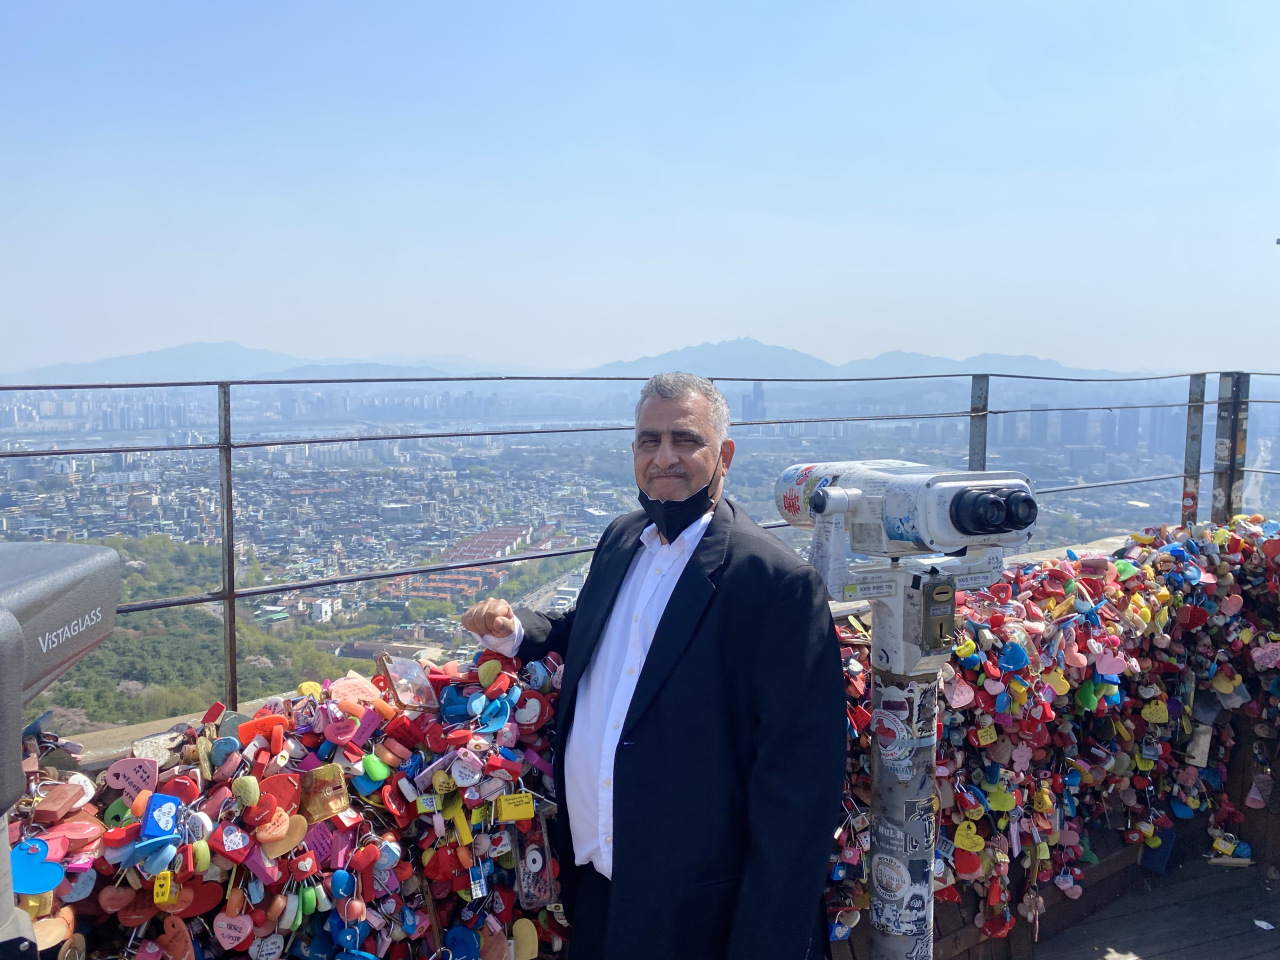 A view of Seoul from Namsan Seoul Tower (Embassy of the Sultanate of Oman in Seoul)